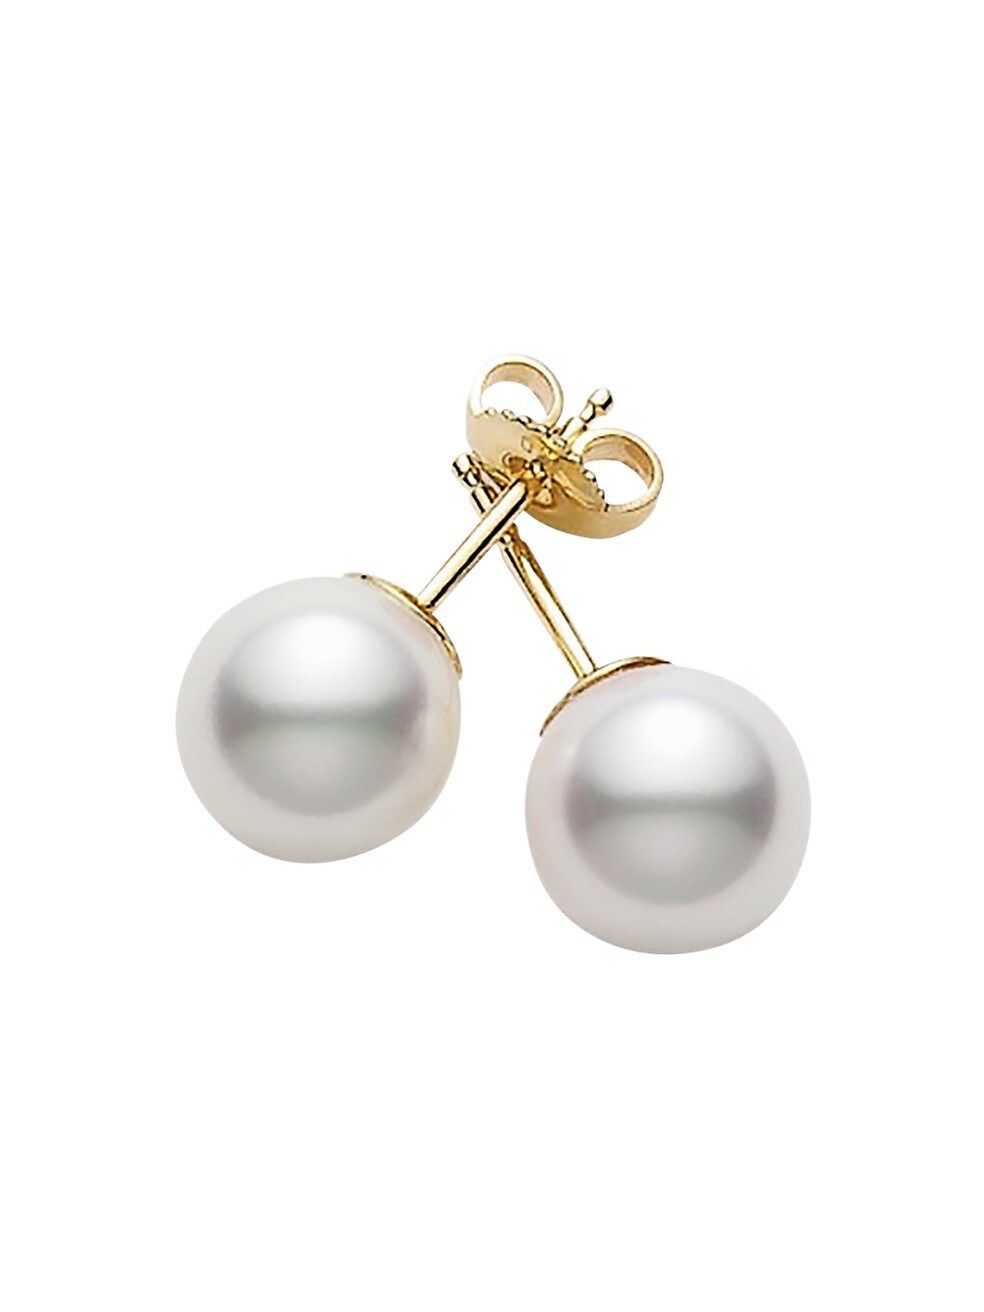 Essential Elements 18K Yellow Gold & 5MM White Cultured Pearl Stud Earrings | Saks Fifth Avenue